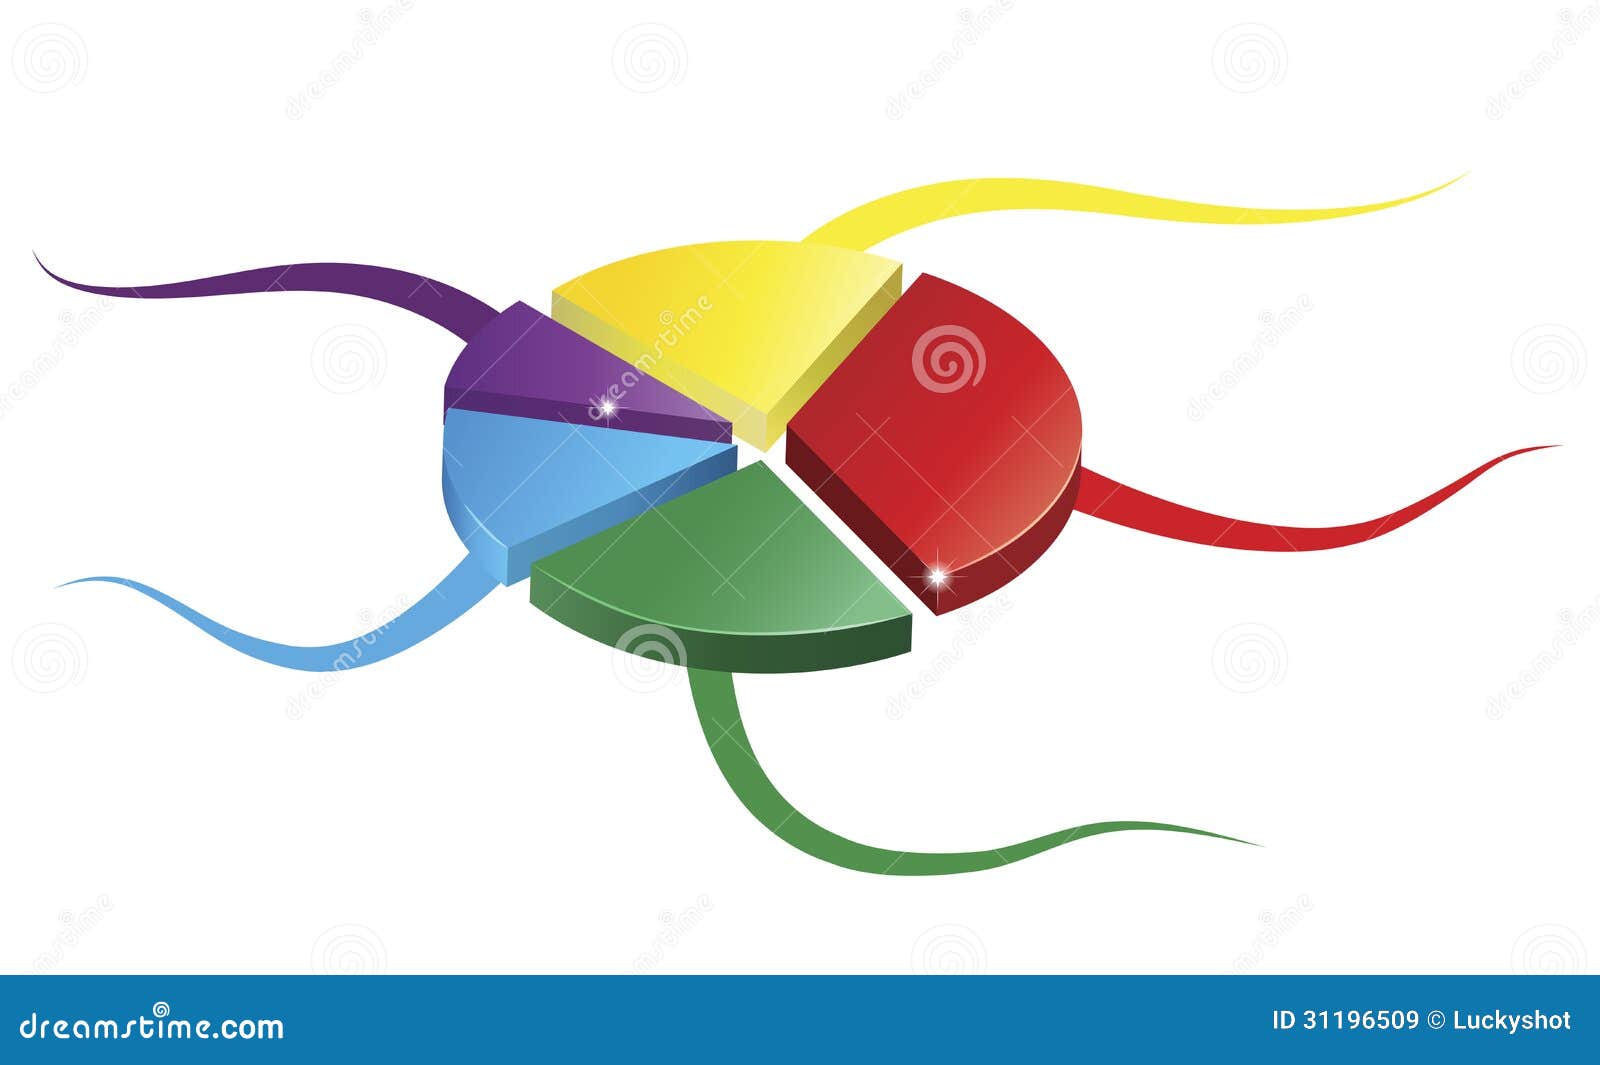 clipart mind map - photo #9